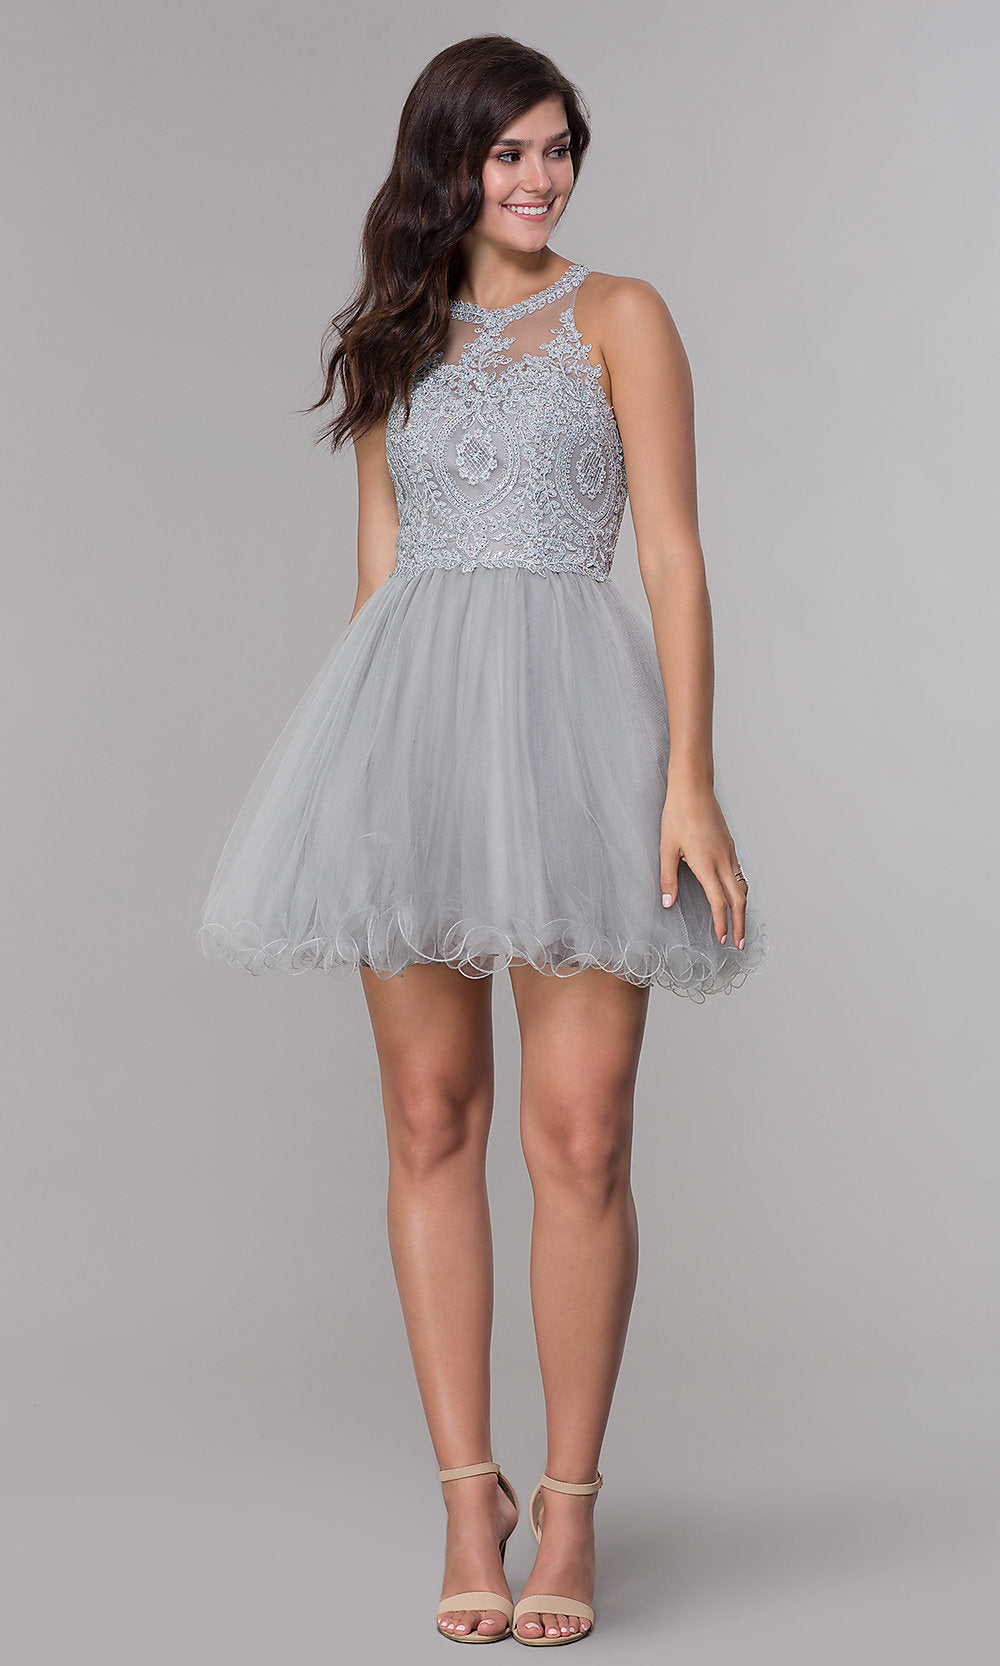  Embroidered-Applique-Bodice Homecoming Short Dress